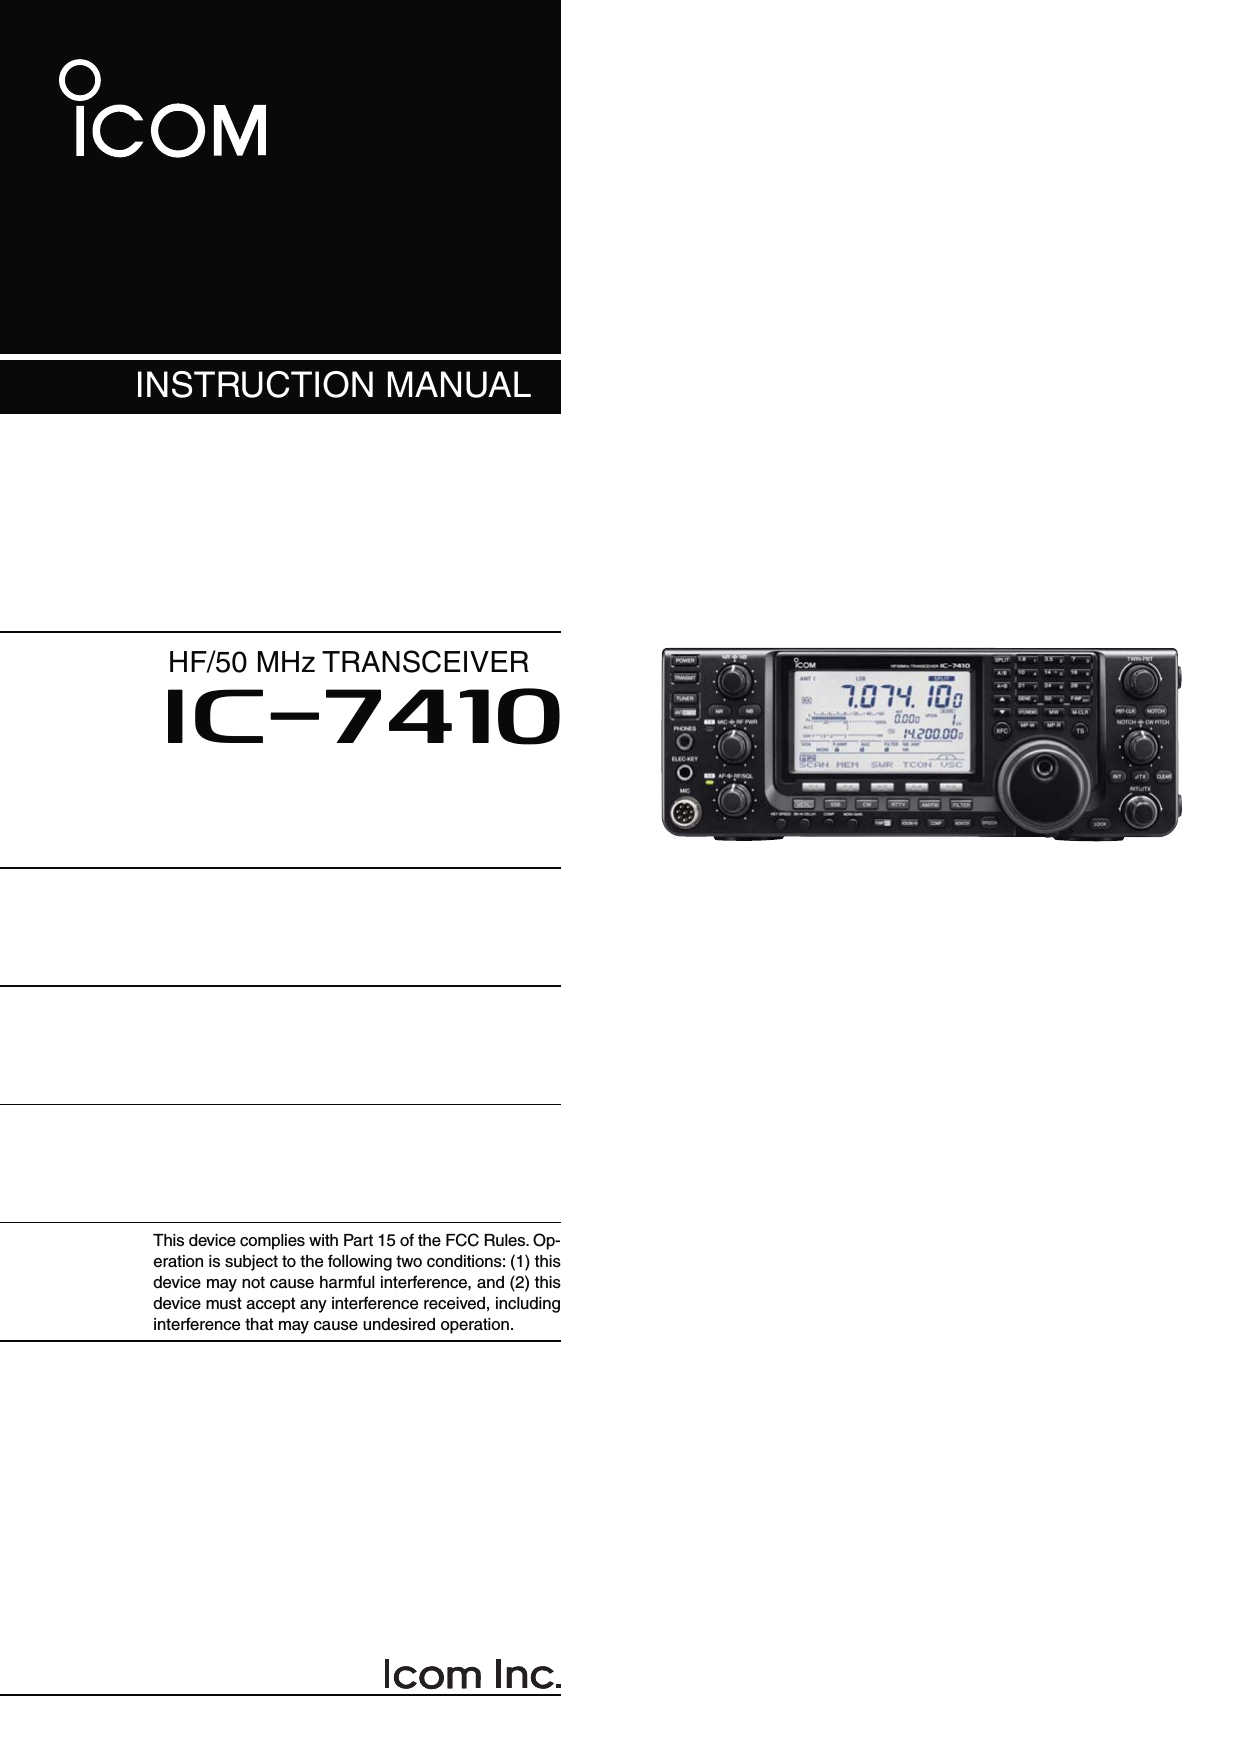 INSTRUCTION MANUALHF/50 MHz TRANSCEIVERi7410This device complies with Part 15 of the FCC Rules. Op-eration is subject to the following two conditions: (1) this device may not cause harmful interference, and (2) this device must accept any interference received, including interference that may cause undesired operation.